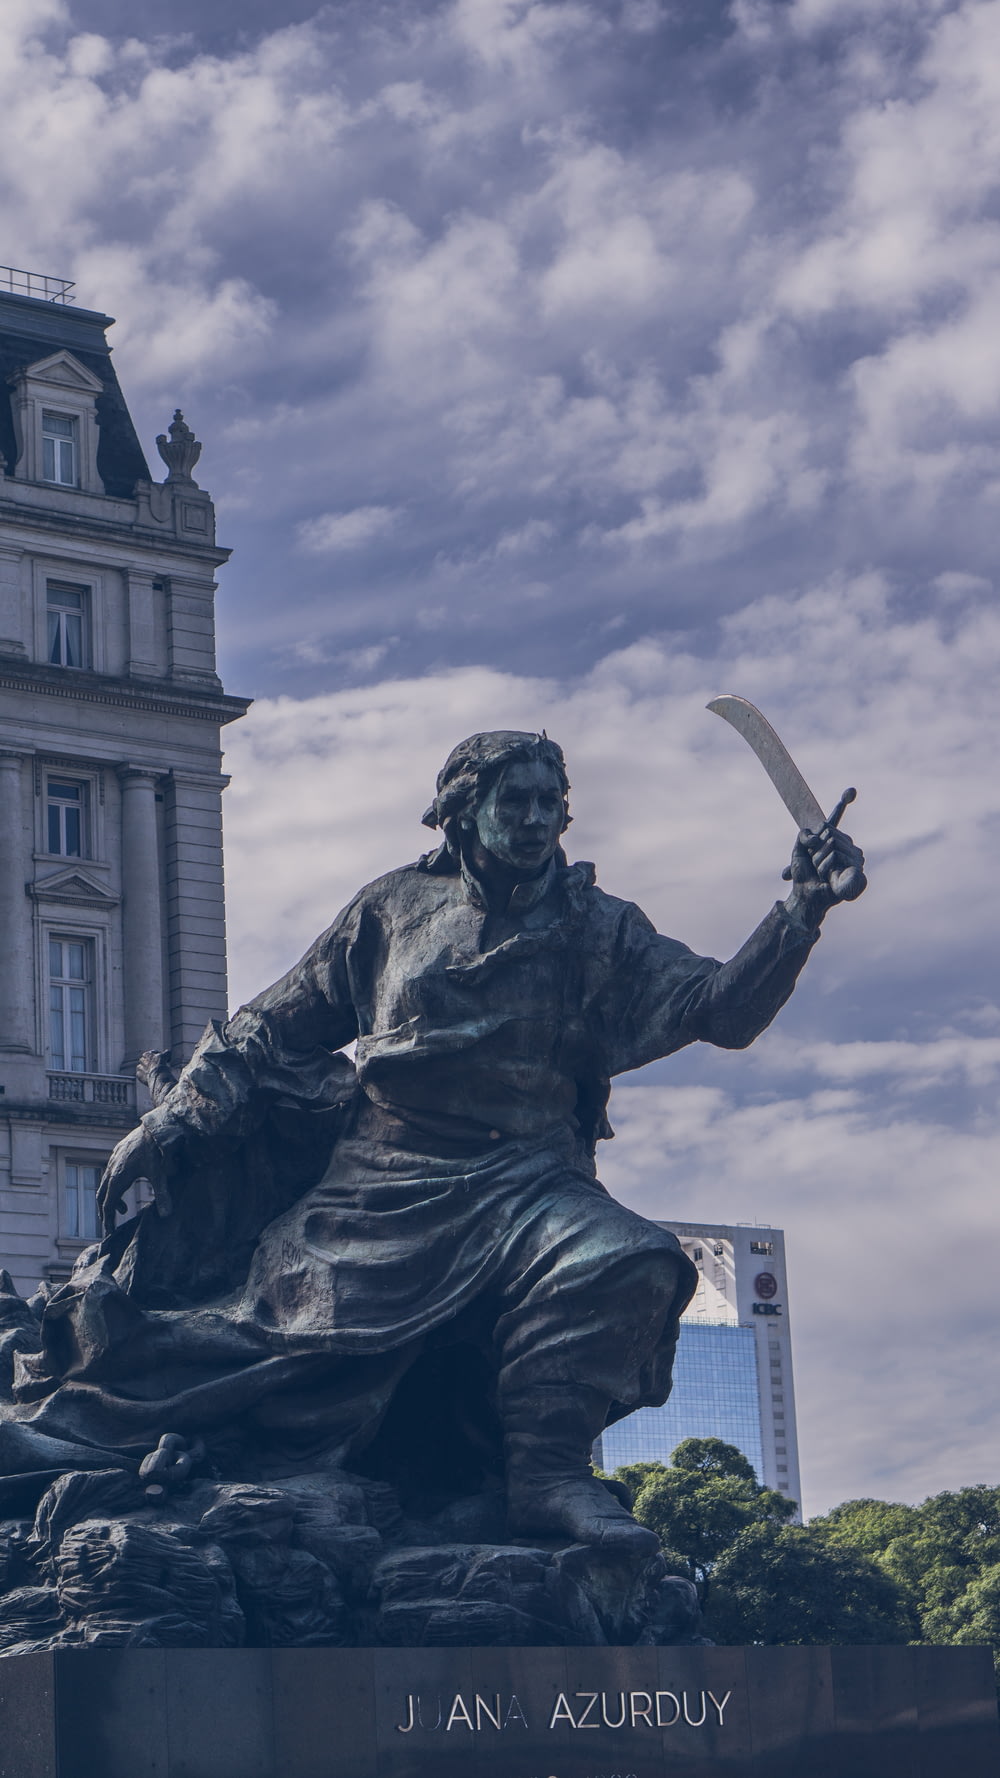 a statue of a man holding a sword in front of a building